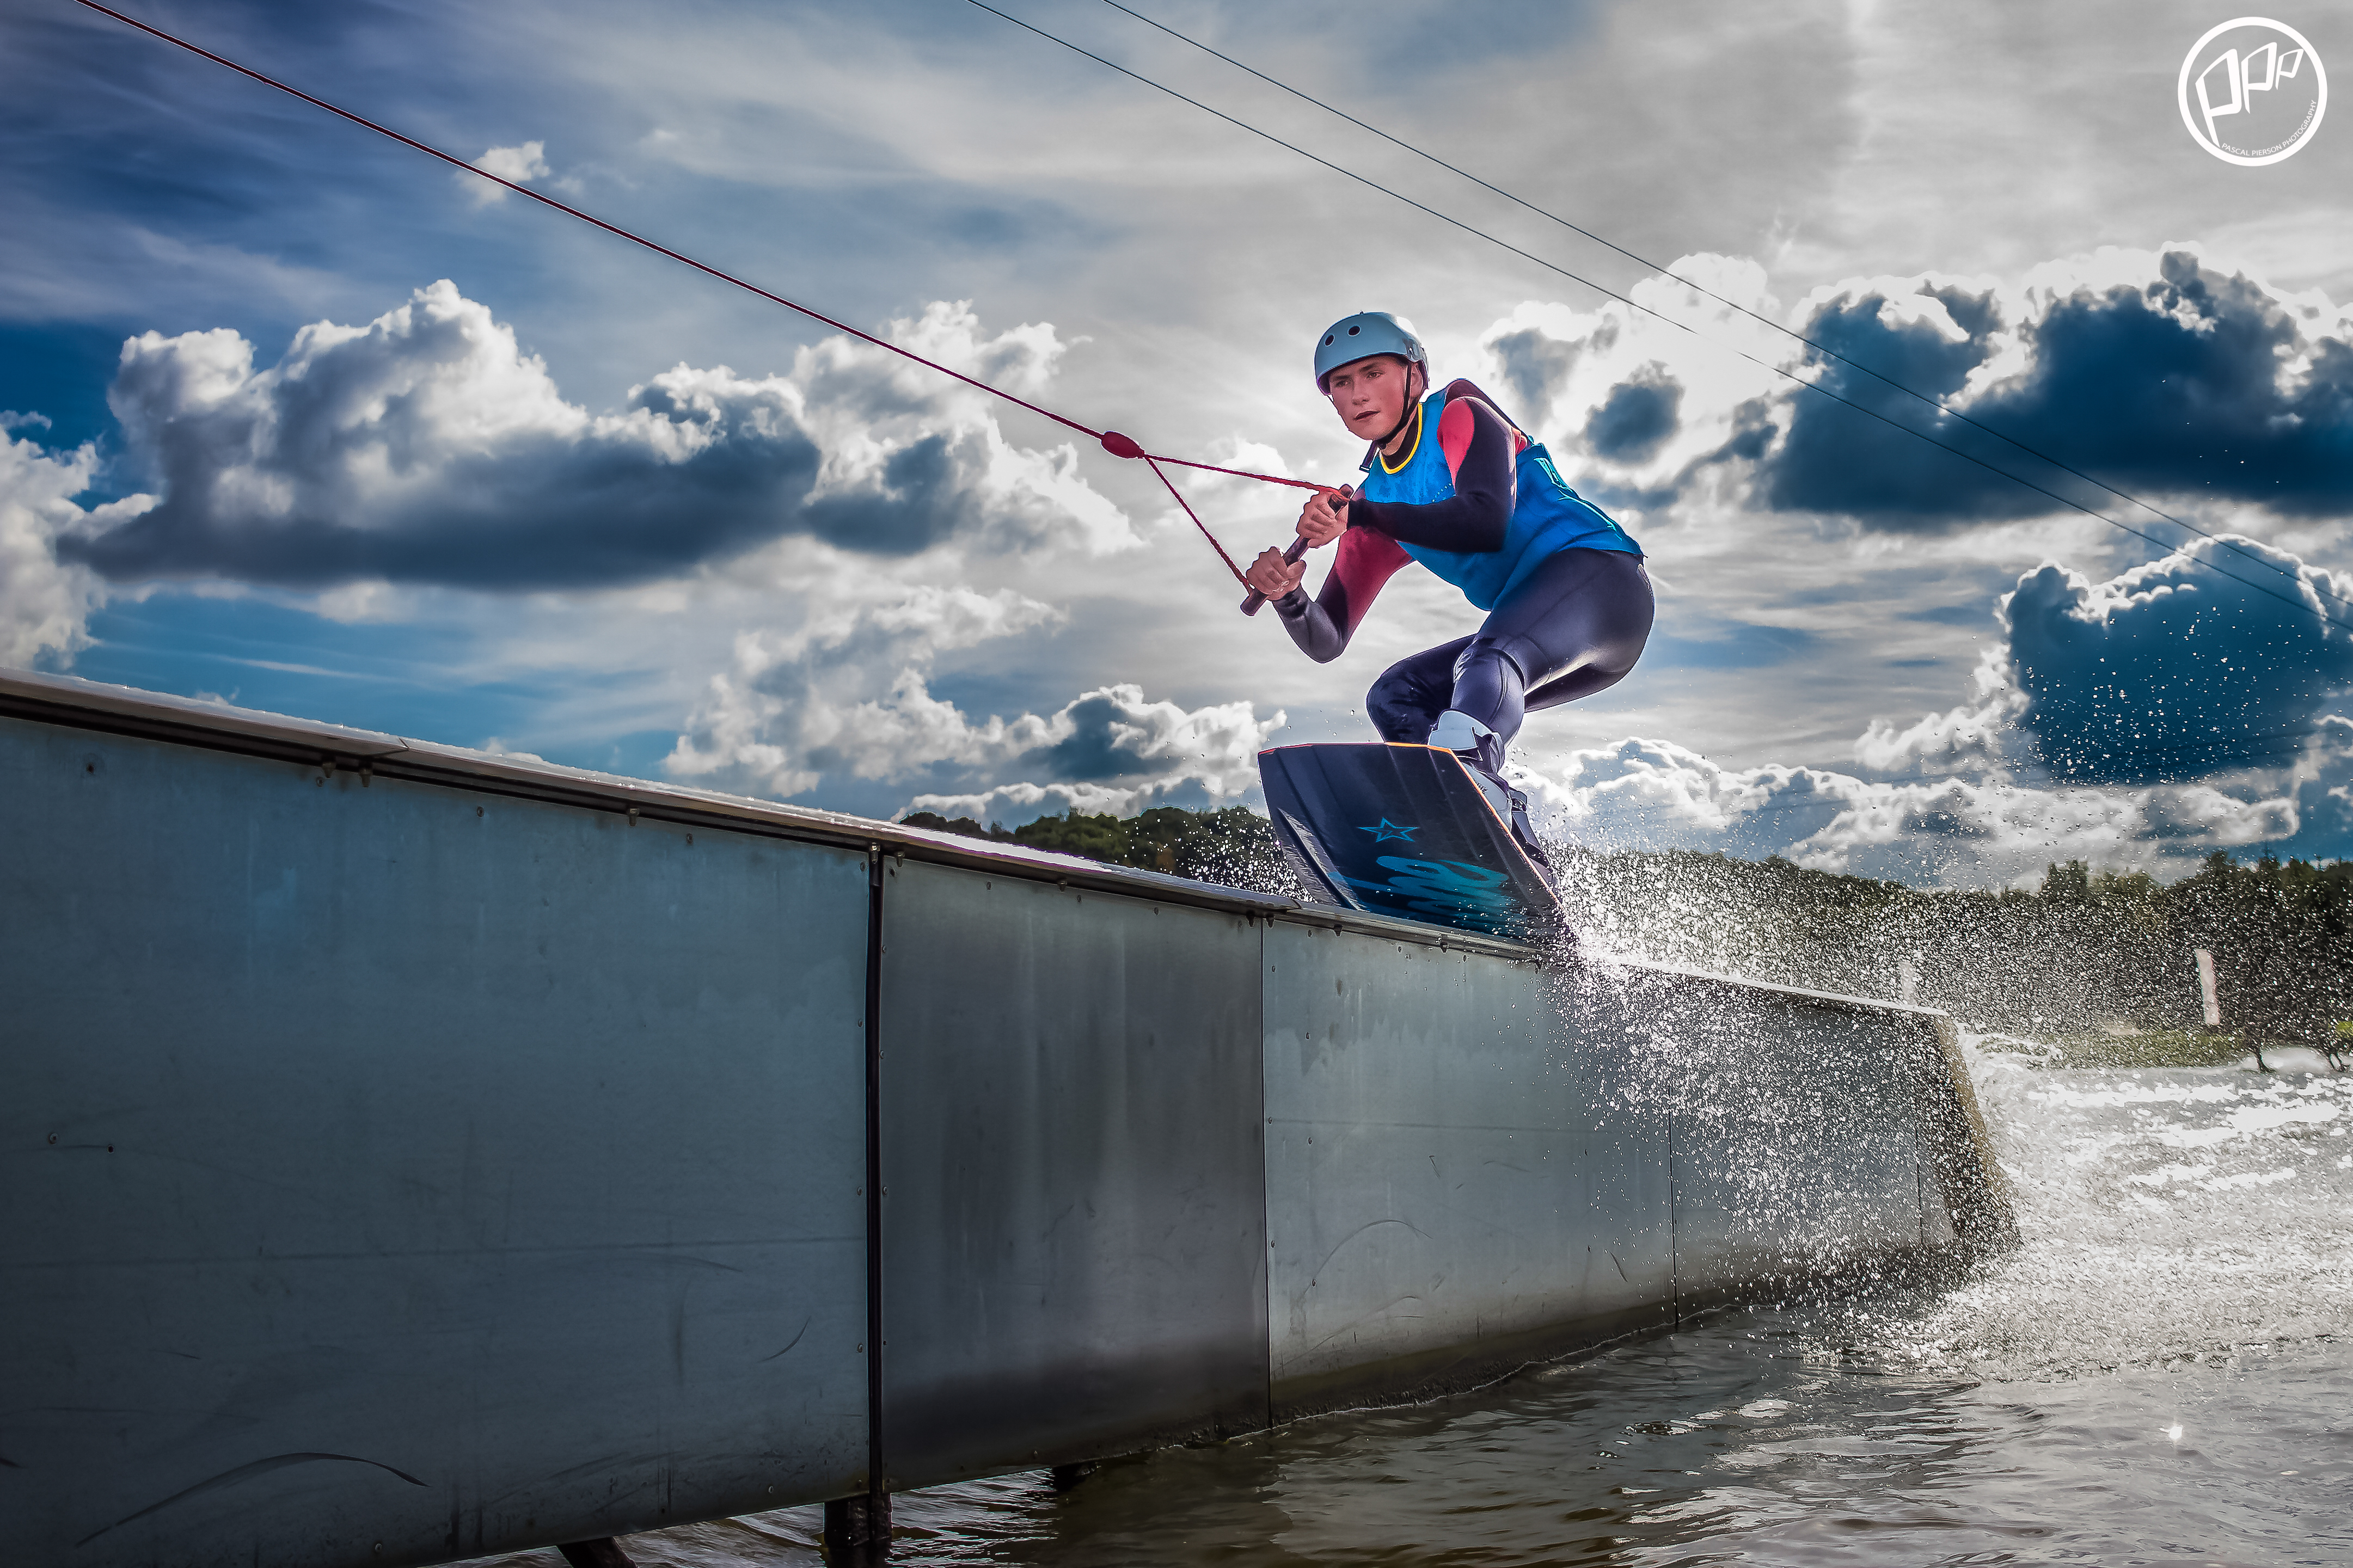 Give The Spin Cablepark, a waterski lift at the Eau d’Heure lakes, a try